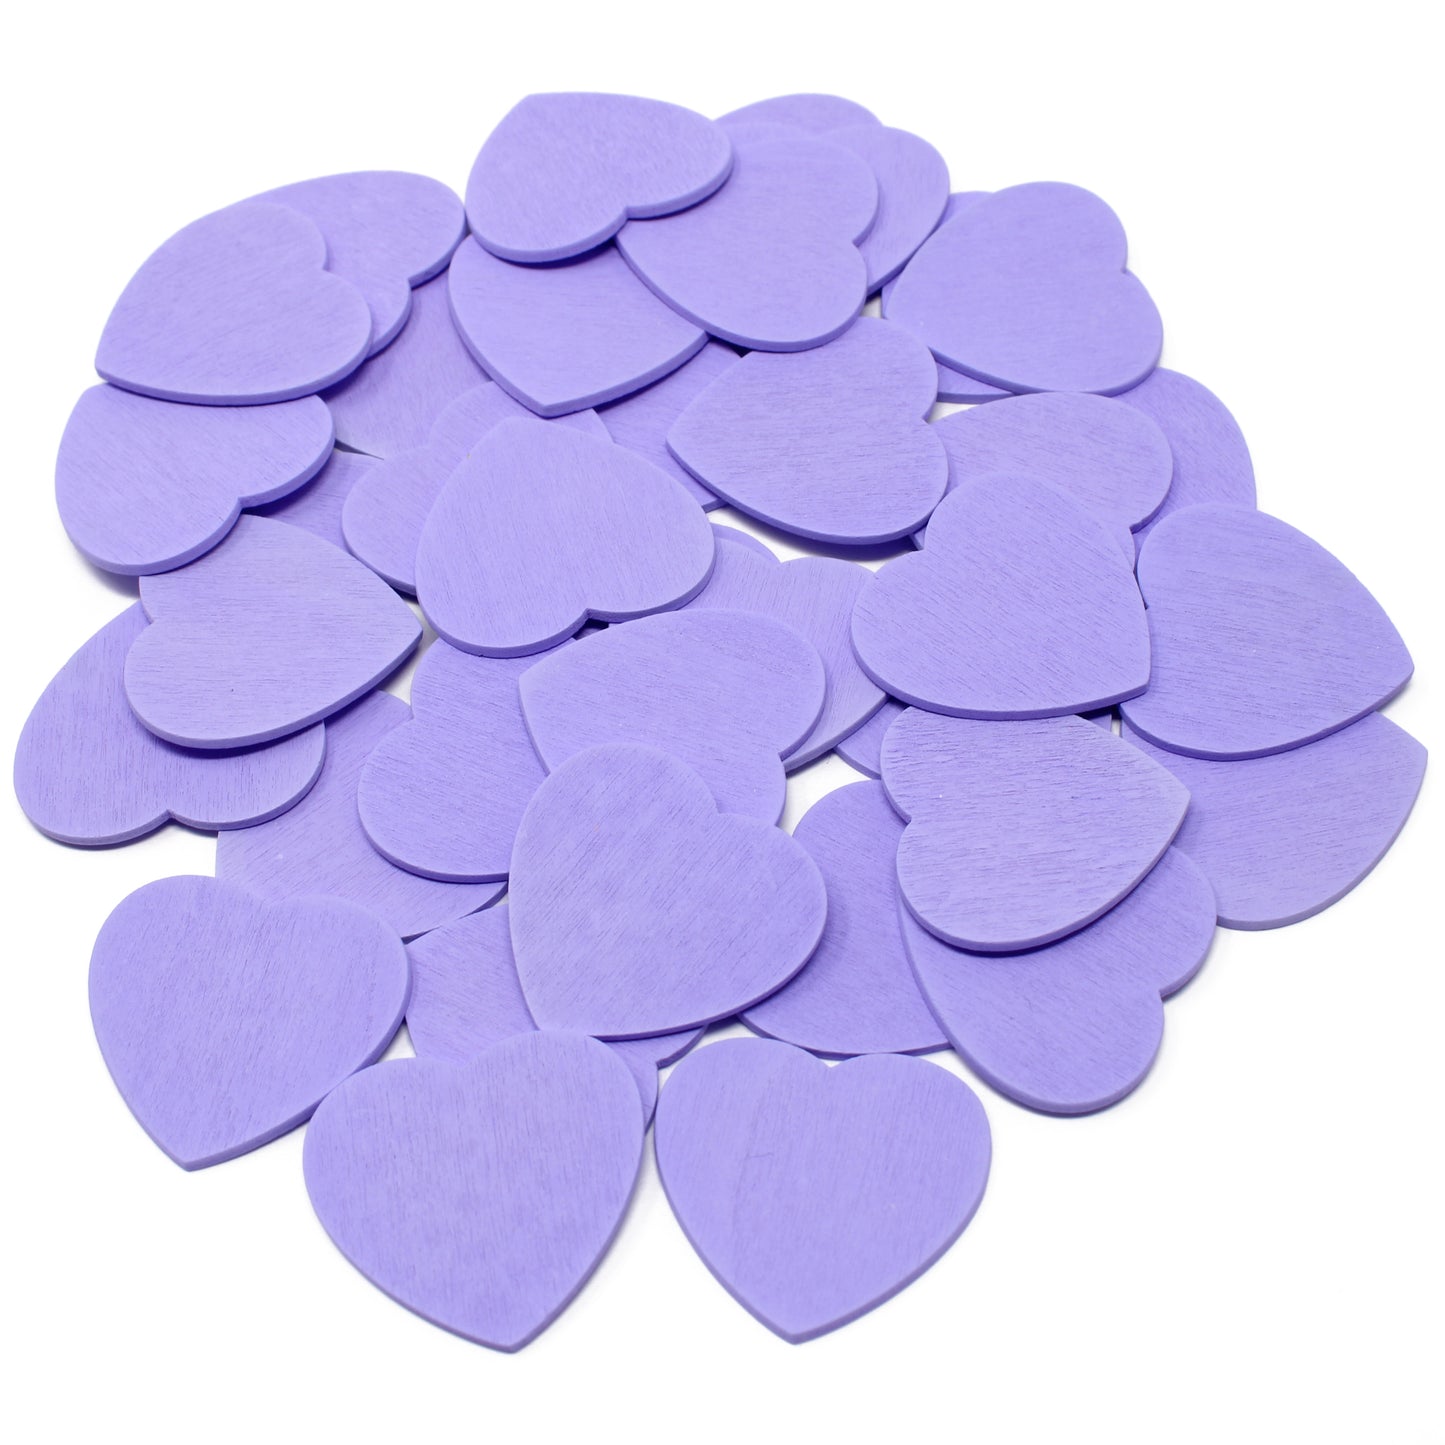 Lilac 28mm Wooden Craft Coloured Hearts